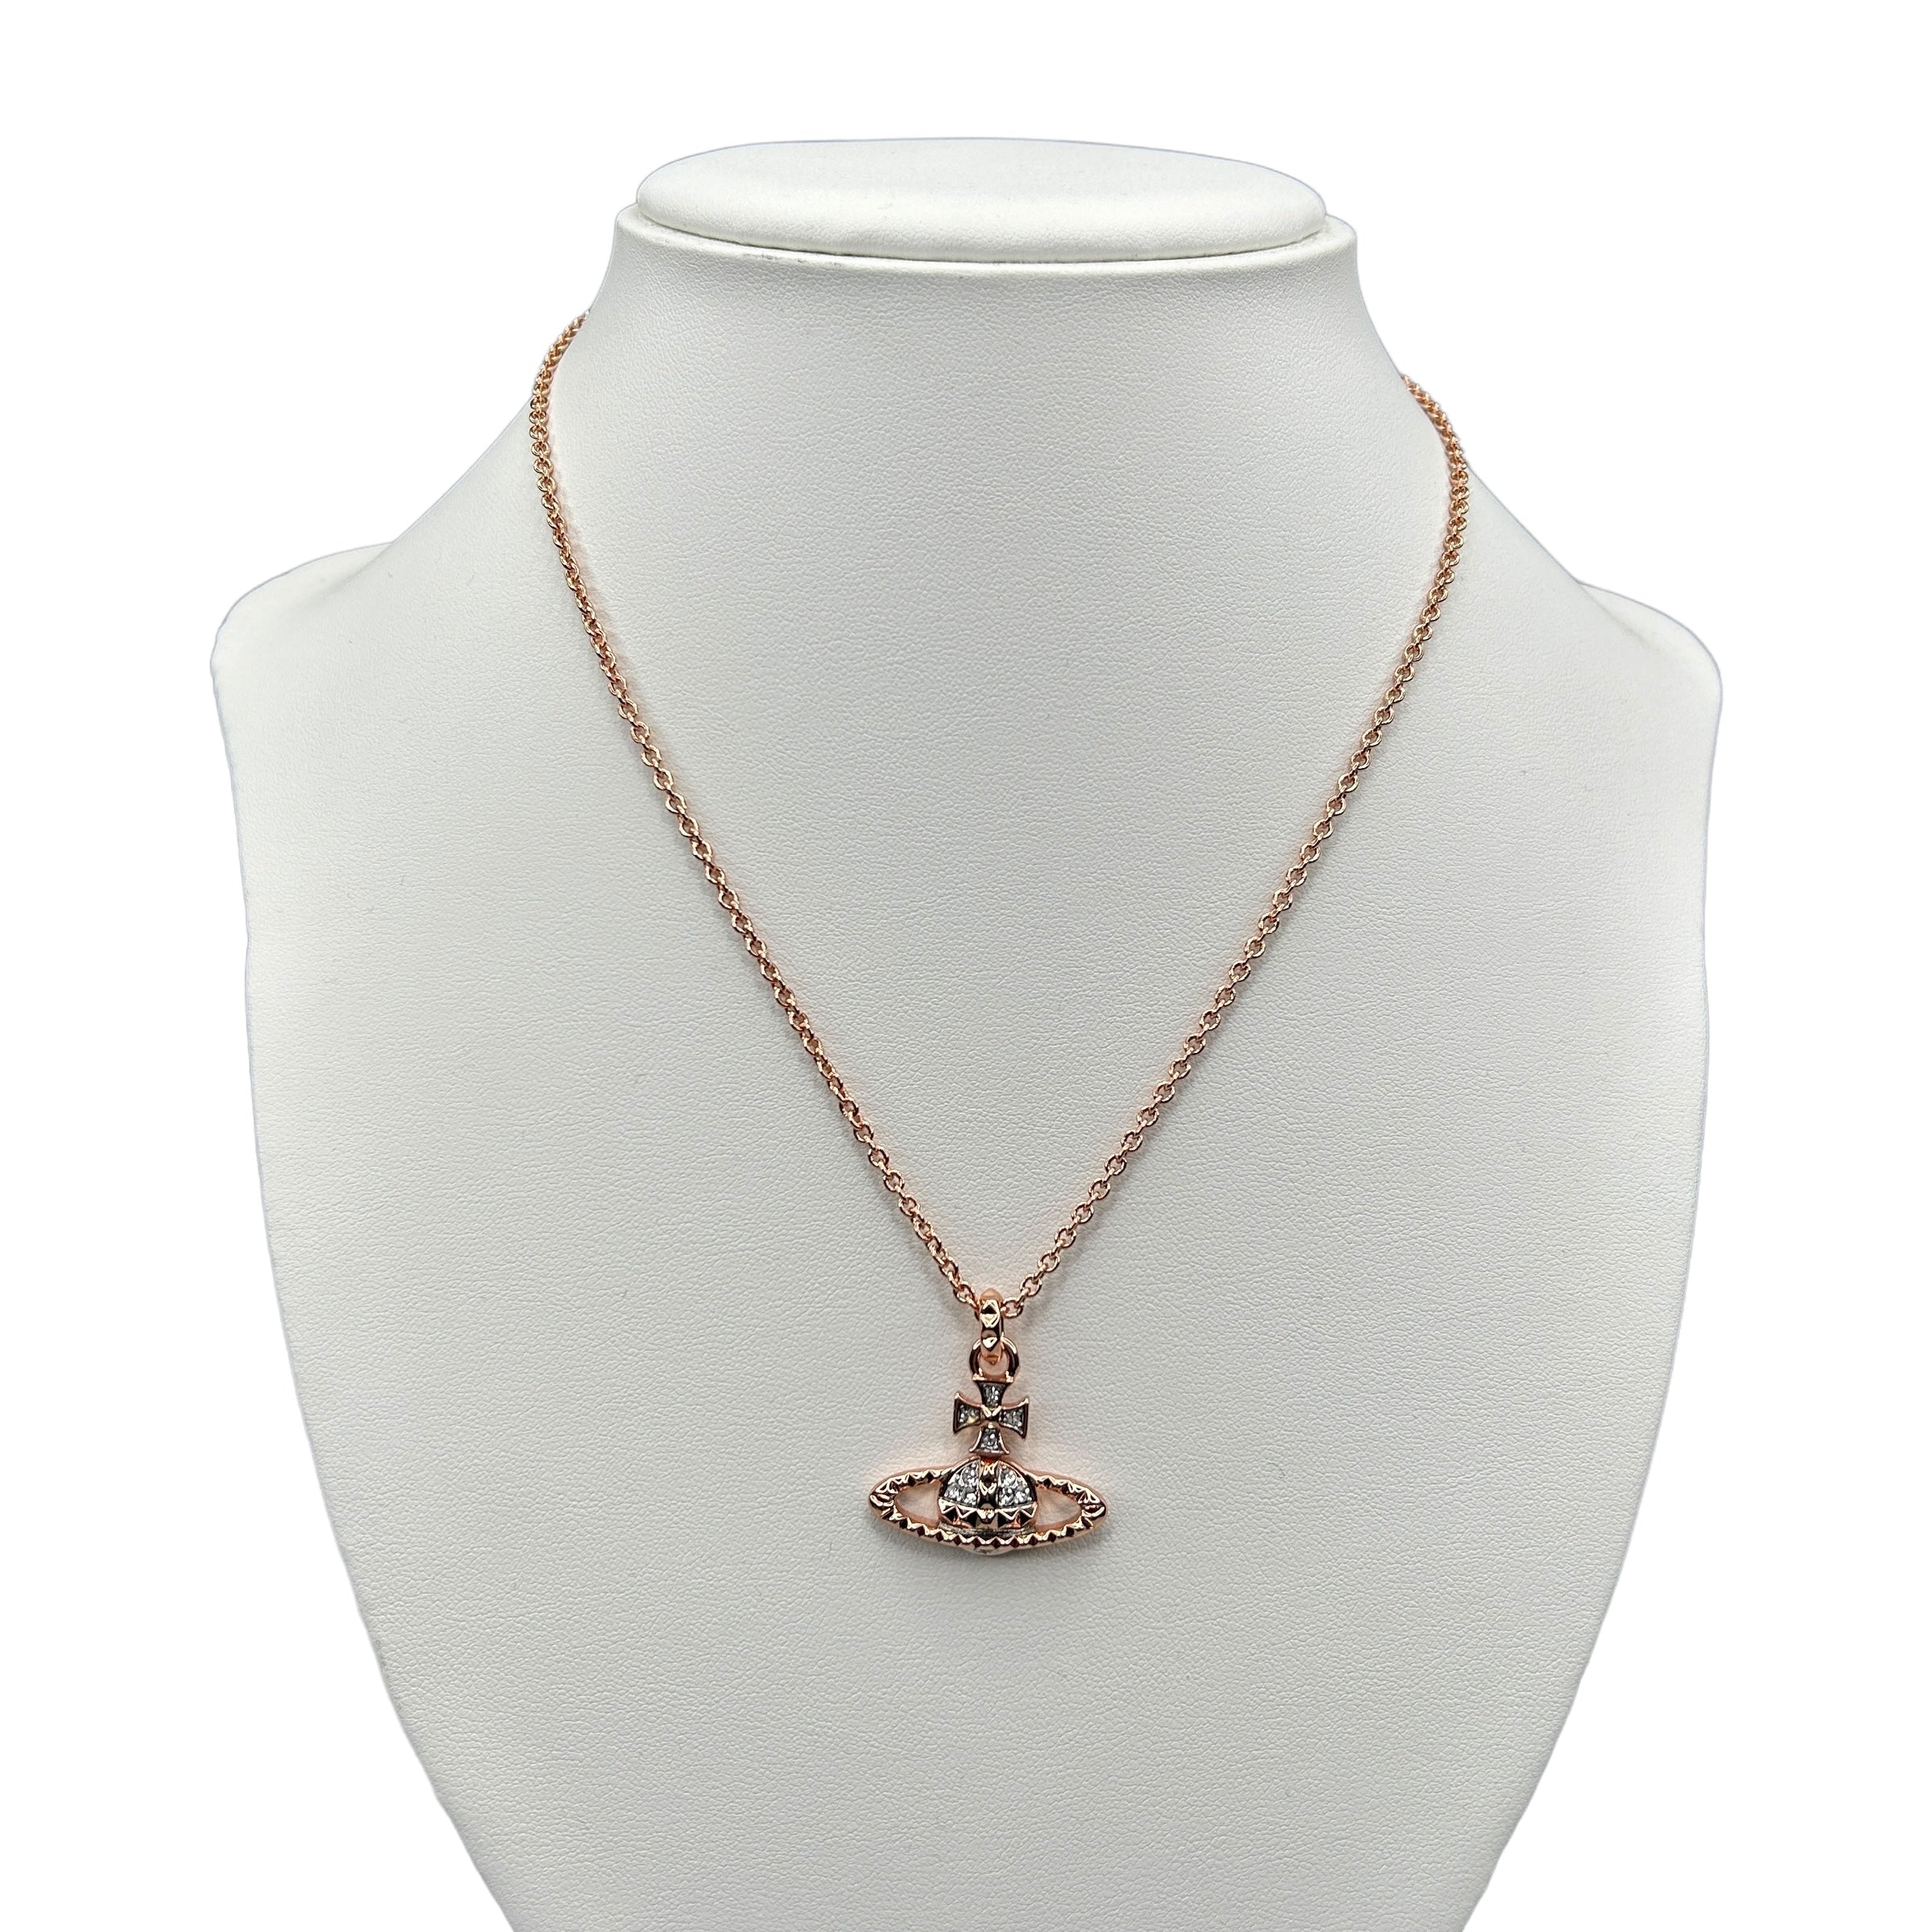 (NEW) VIVIENNE WESTWOOD ROSE-GOLD MAYFAIR BAS RELIEF NECKLACE 02HF